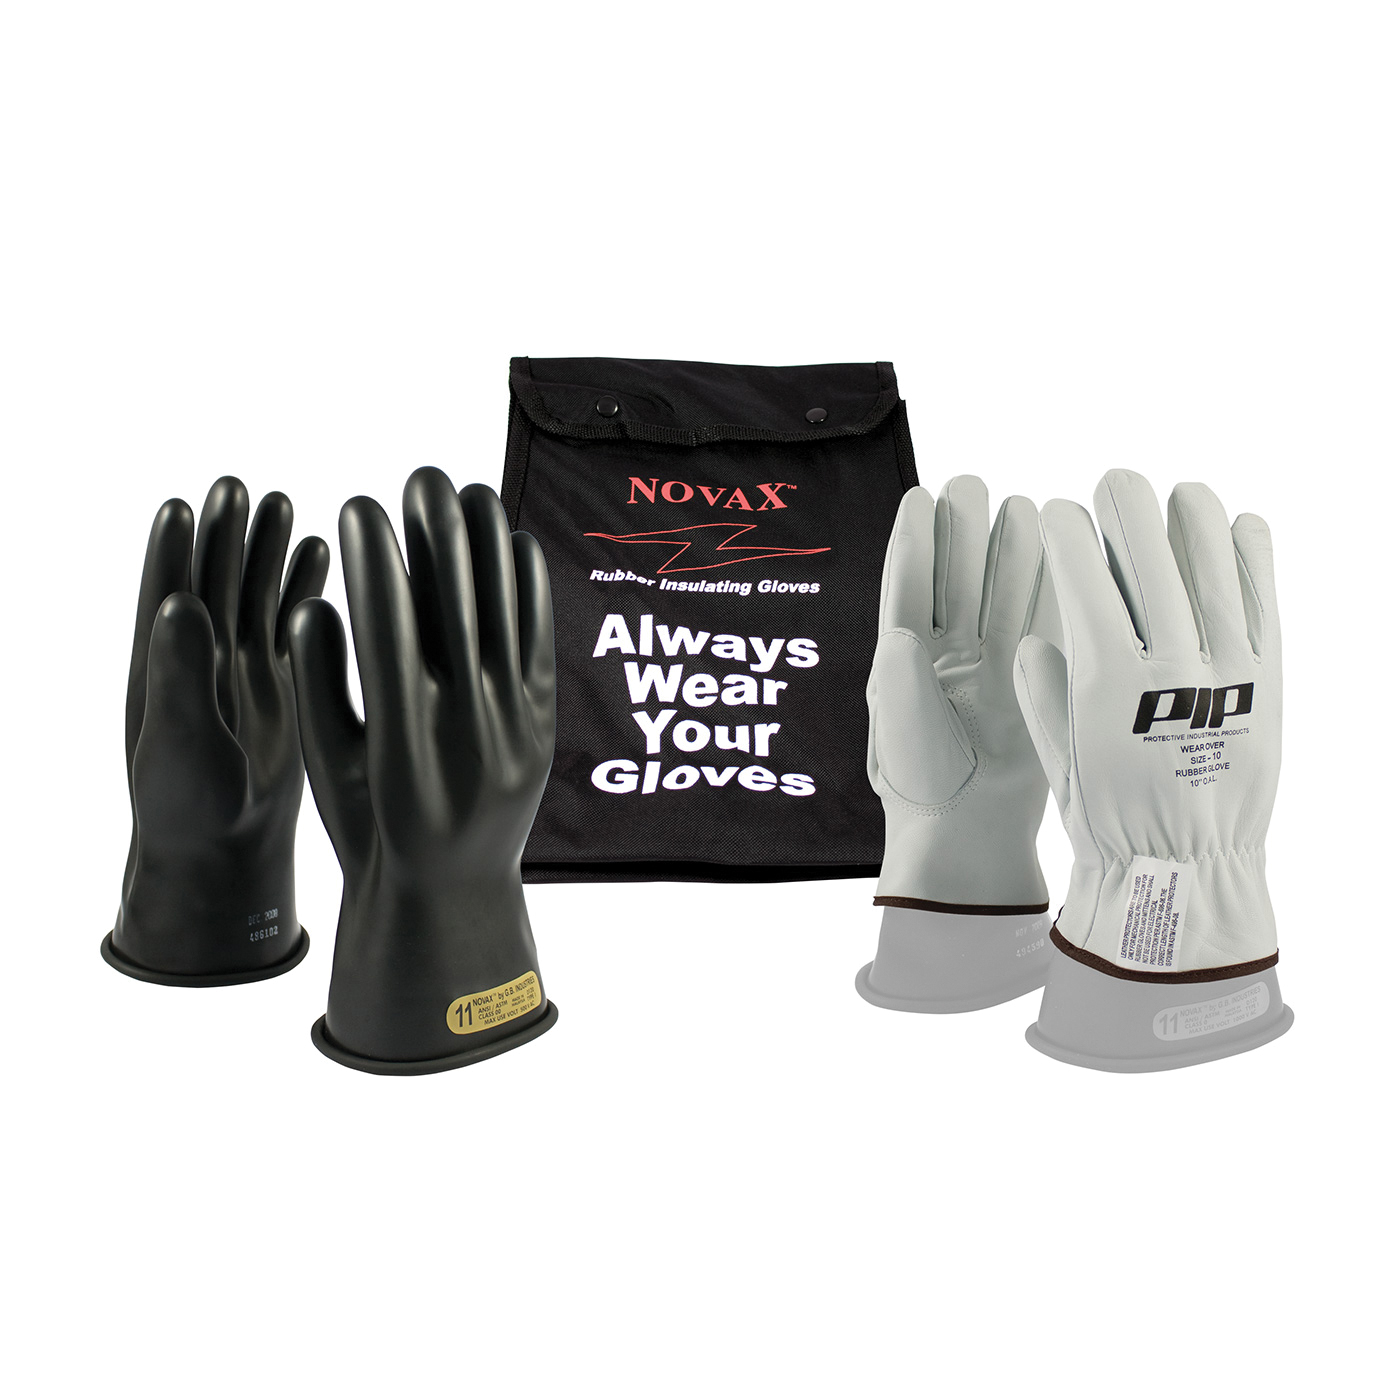 Novax® 150-SK-00/12-KIT Insulating Unisex Electrical Safety Gloves Kit, SZ 12, Goatskin Leather/Natural Rubber, Black/Natural, 11 in L, ASTM Class: Class 00, 500 VAC, 750 VDC Max Use Voltage